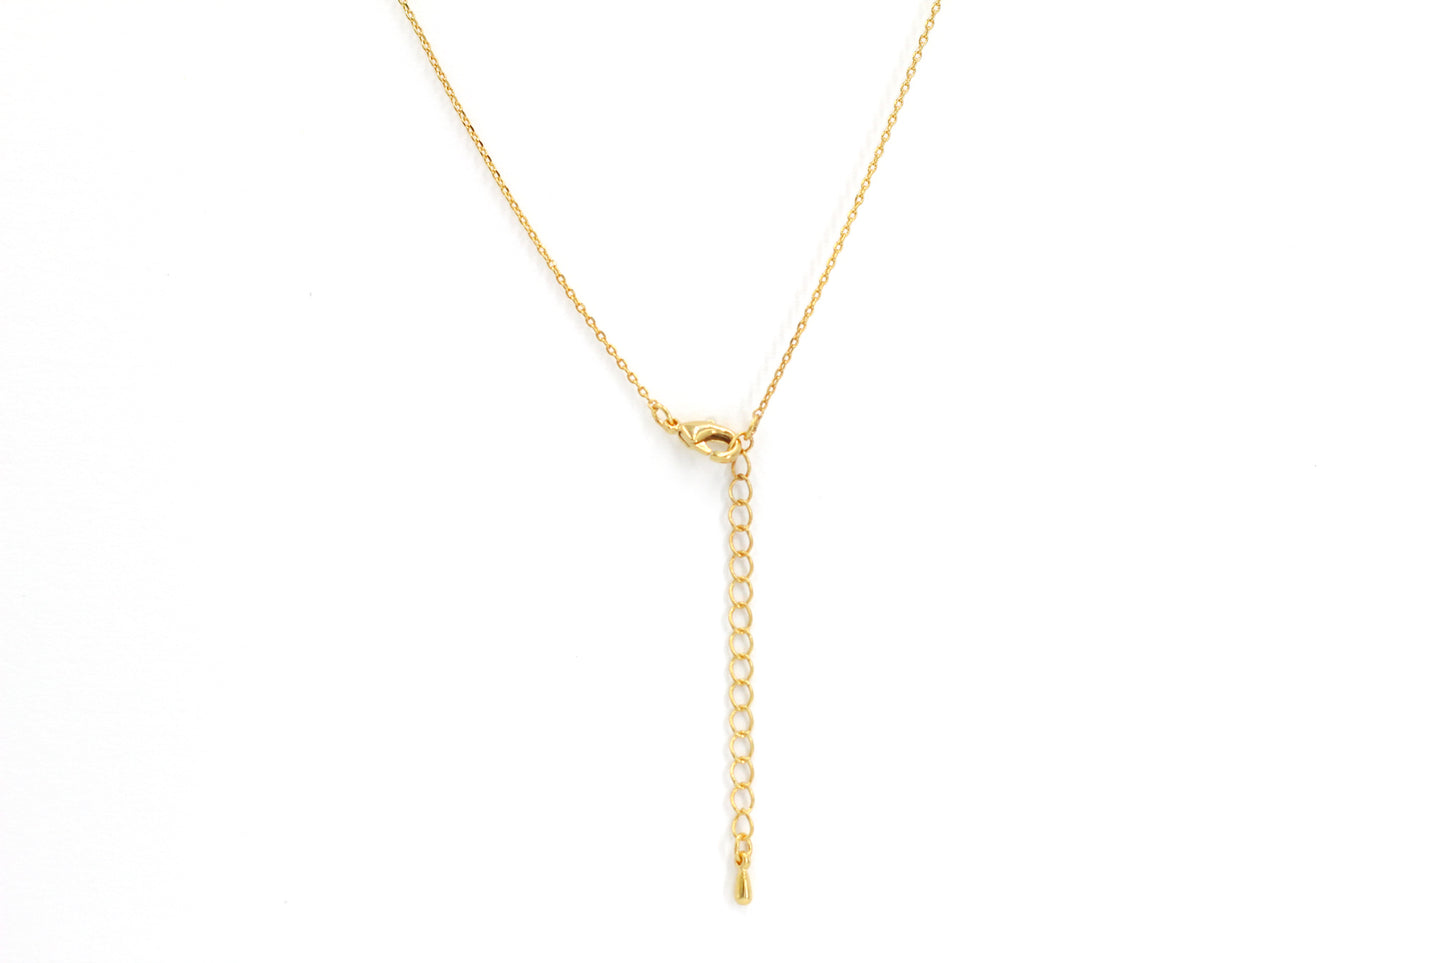 Dainty Cone Necklace. Showing the back view with the lock.